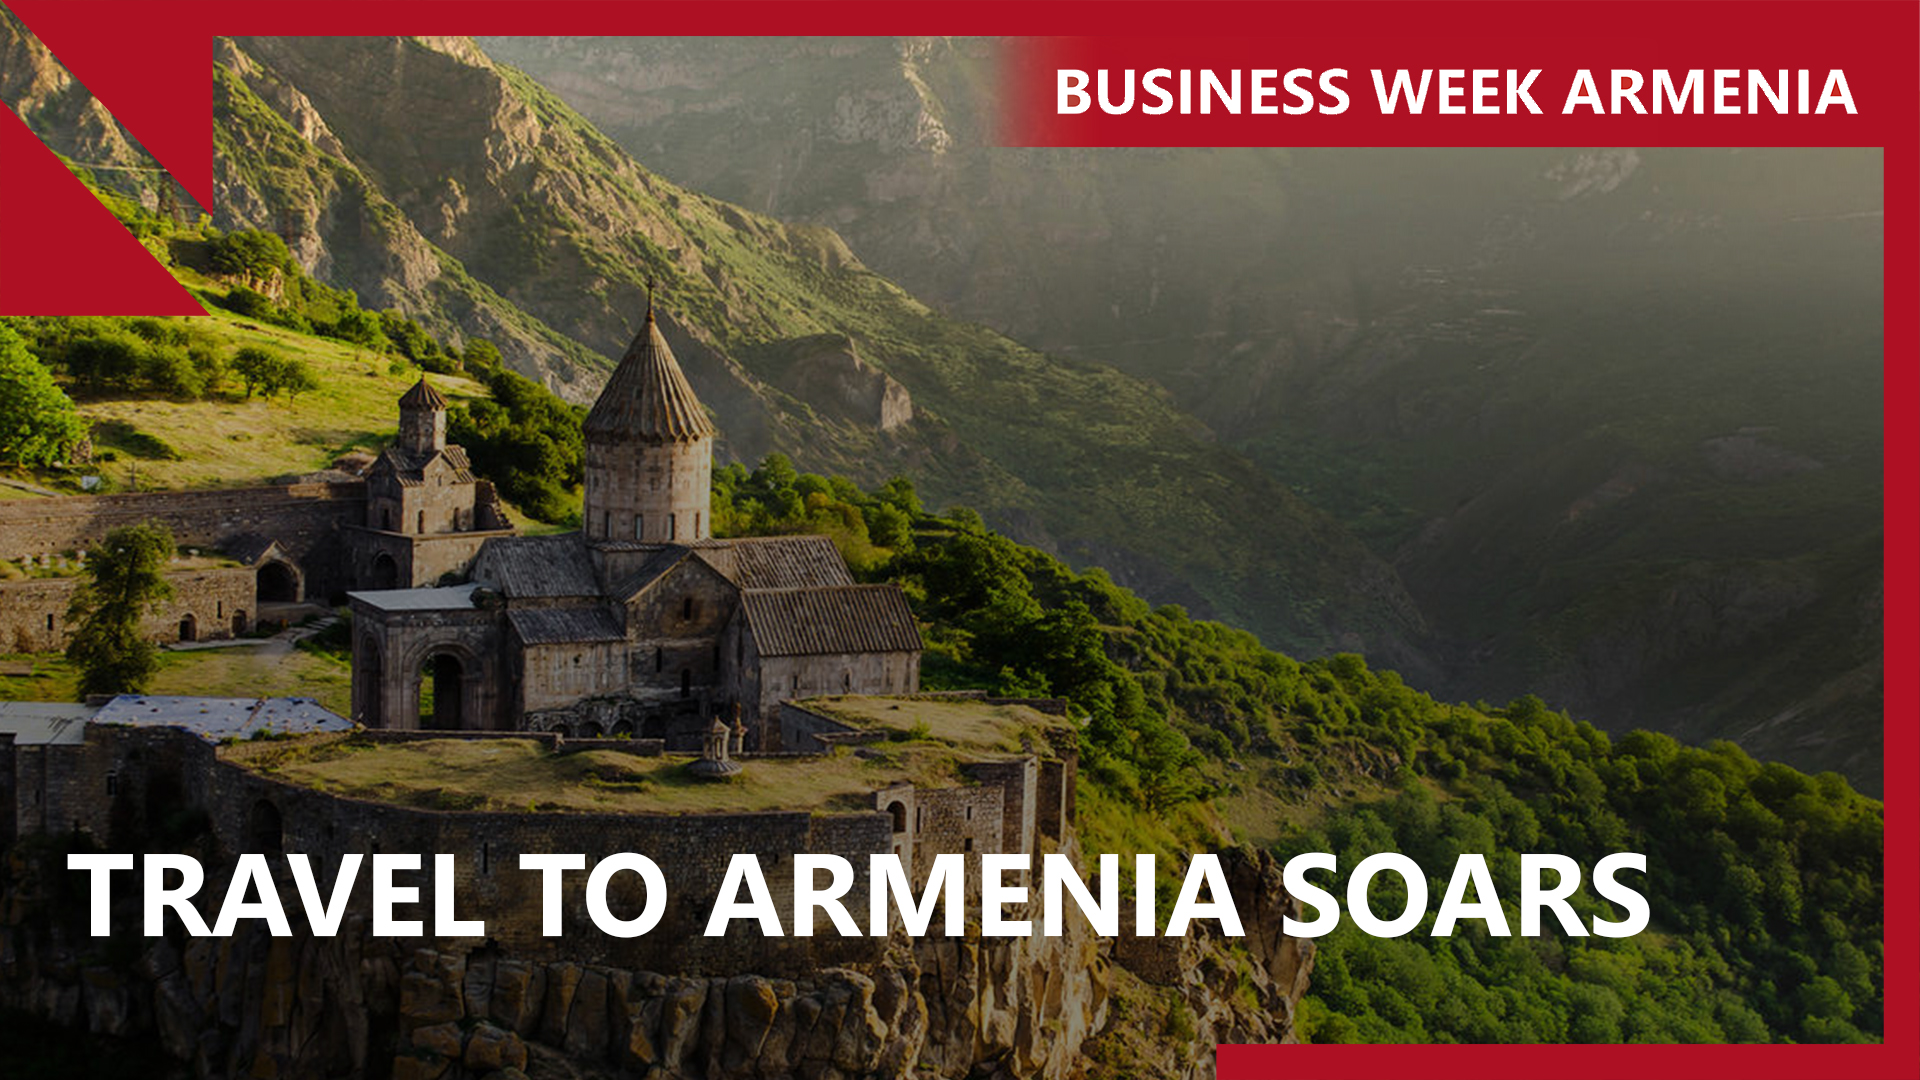 Armenia on track to smash all-time tourism record: THIS WEEK IN BUSINESS